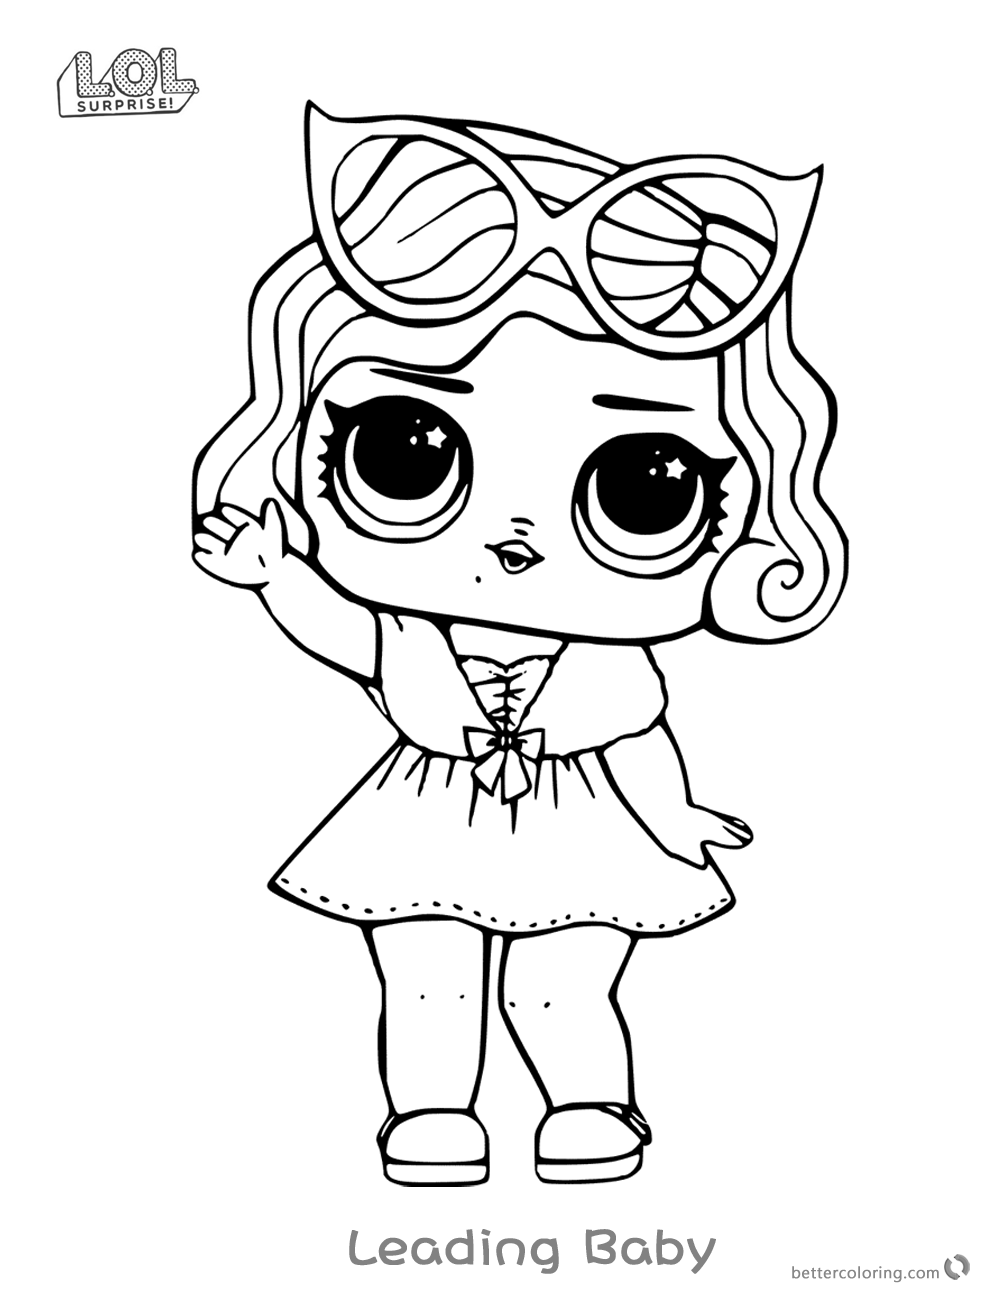 Leading Baby from LOL Surprise Doll Coloring Pages printable